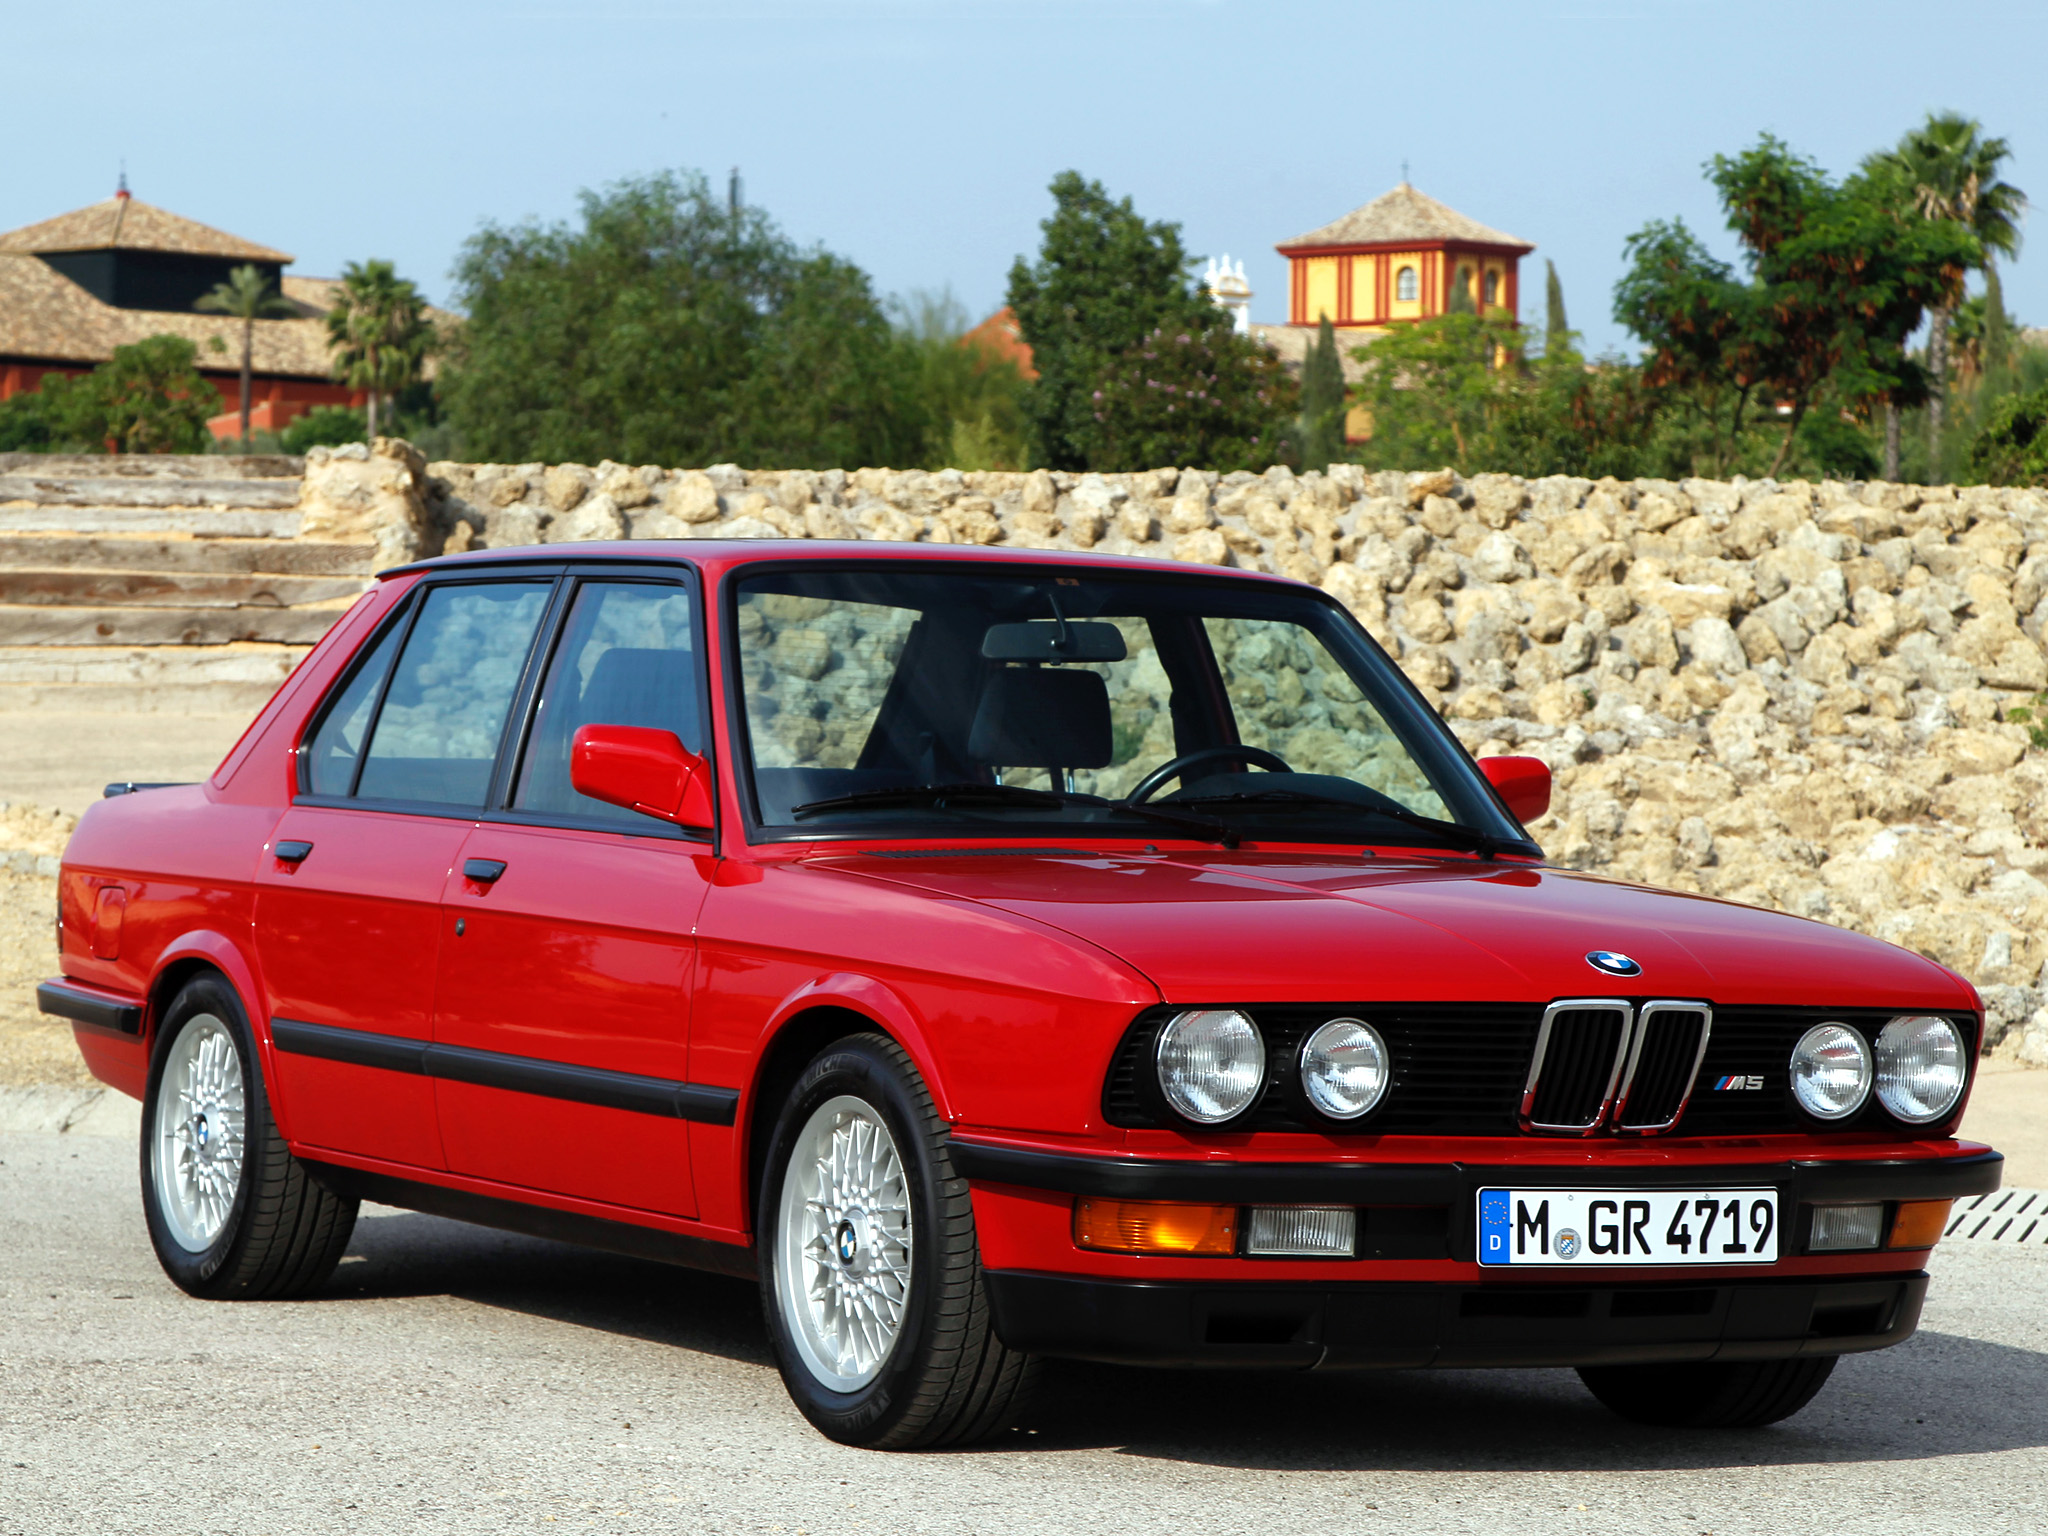 BMW M5 1985 Review, Amazing Pictures and Images Look at